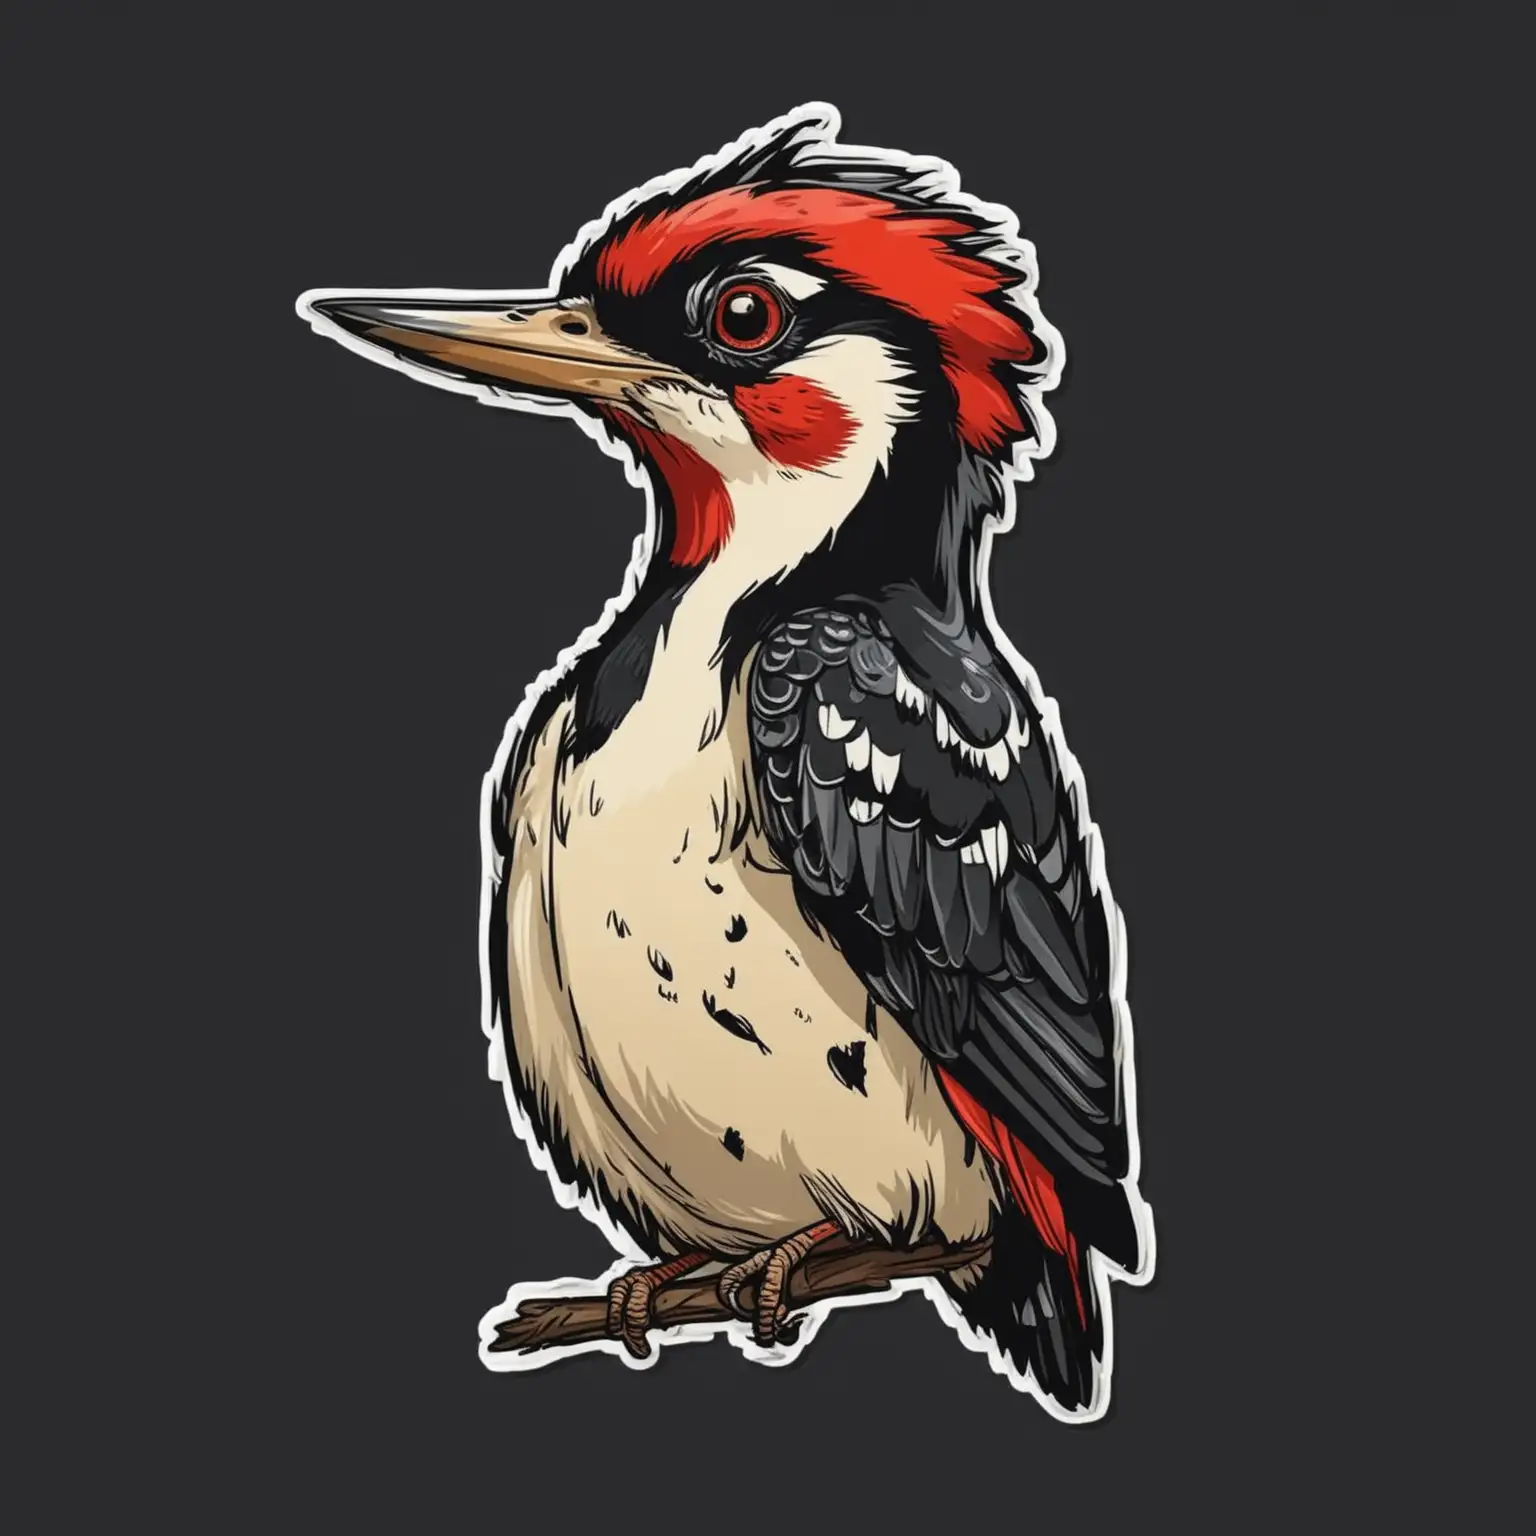 Sticker of a Woodpecker full body, caricature style, exaggerated features, bold lines, Die-cut sticker, vector, black background